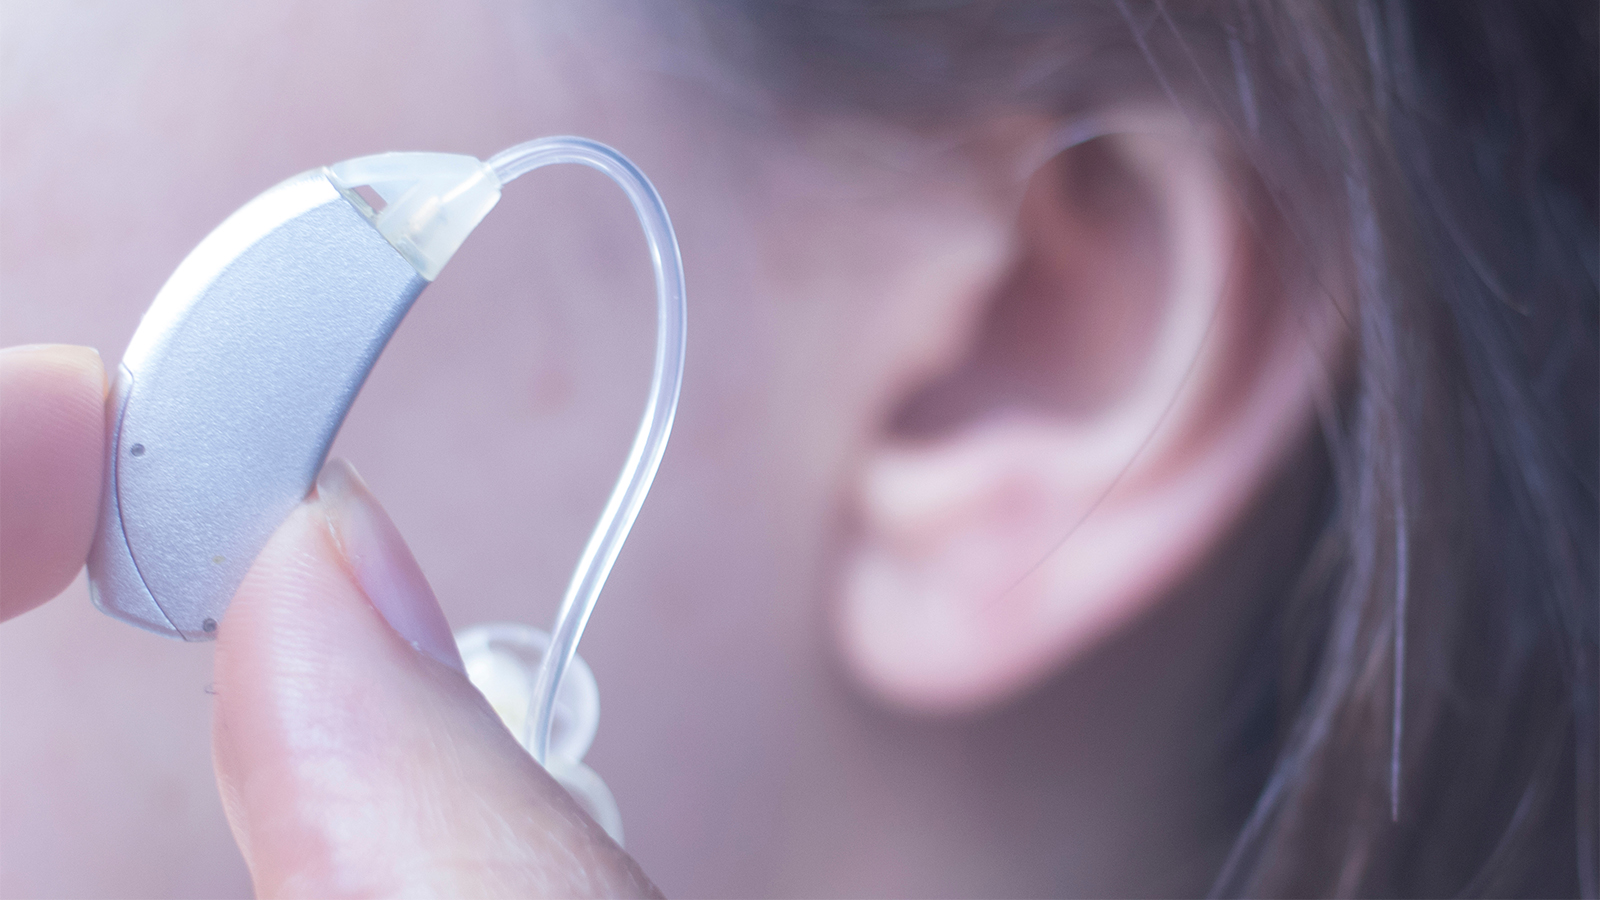 Flexible miniaturized PCBs allow tiny hearing aids